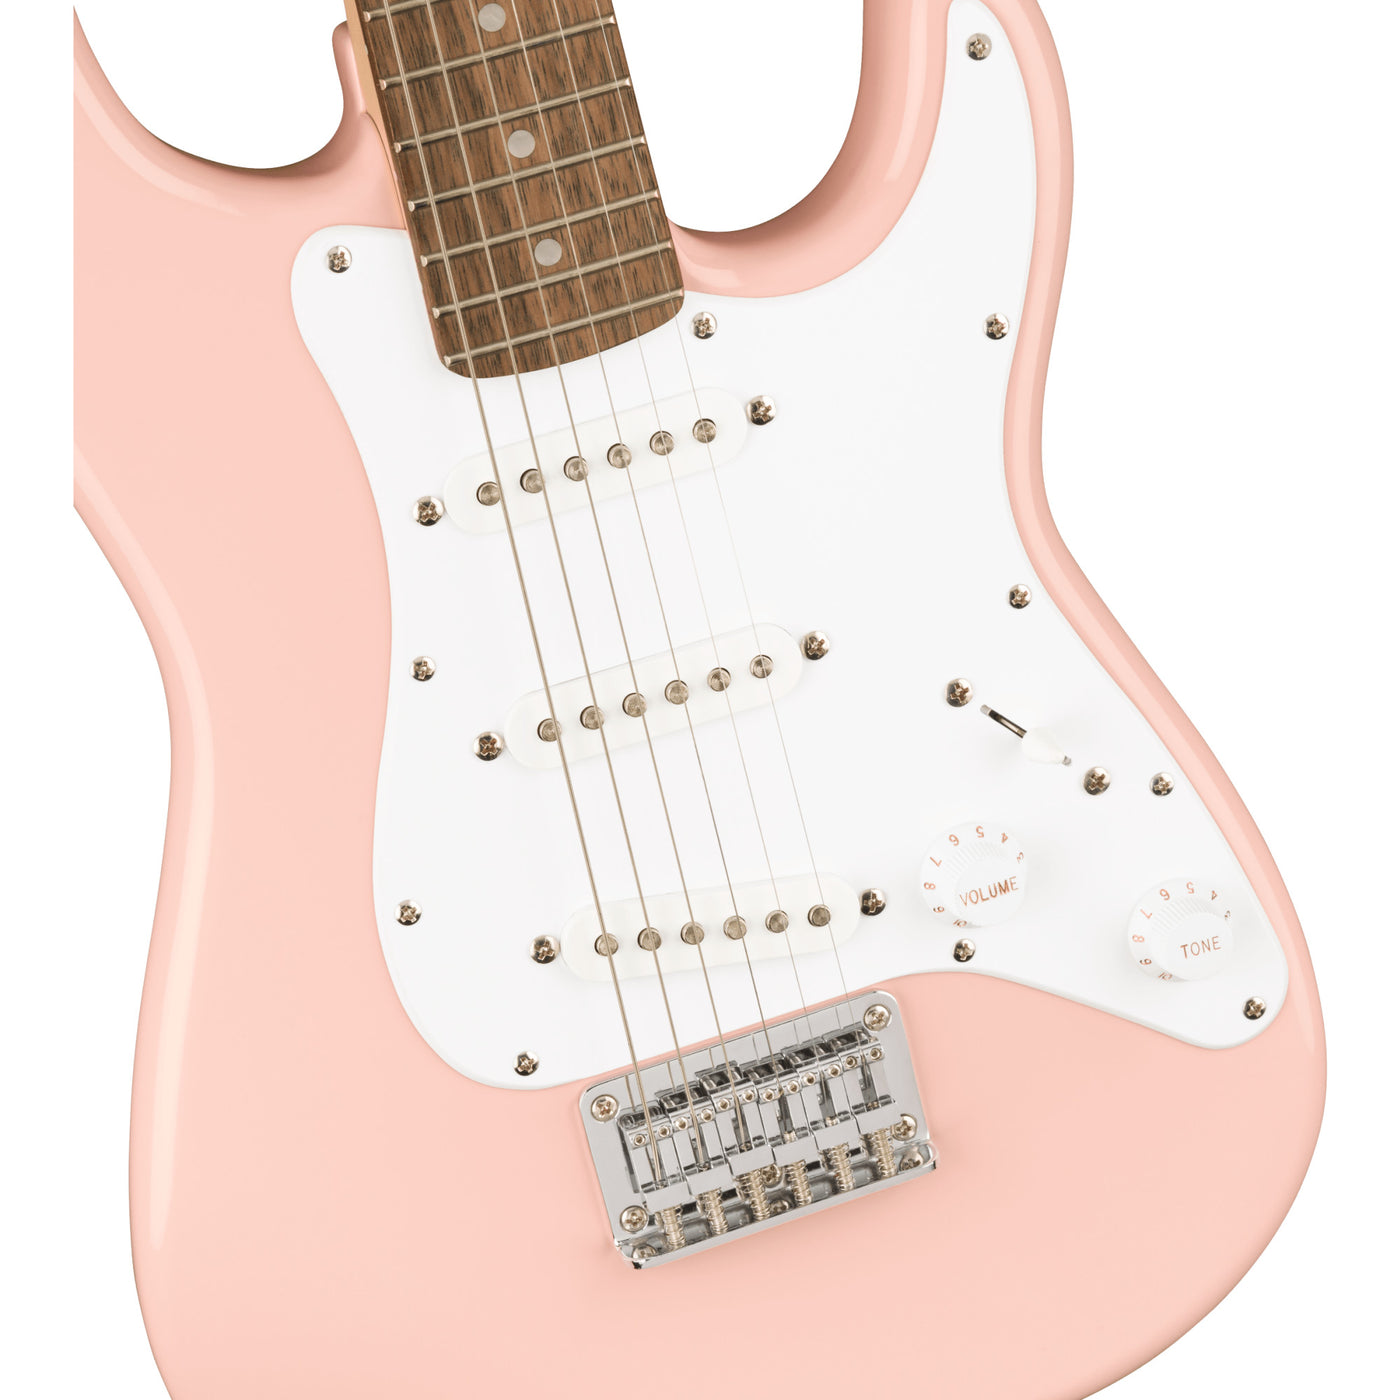 Fender Mini Stratocaster Electric Guitar, Shell Pink (0370121556)